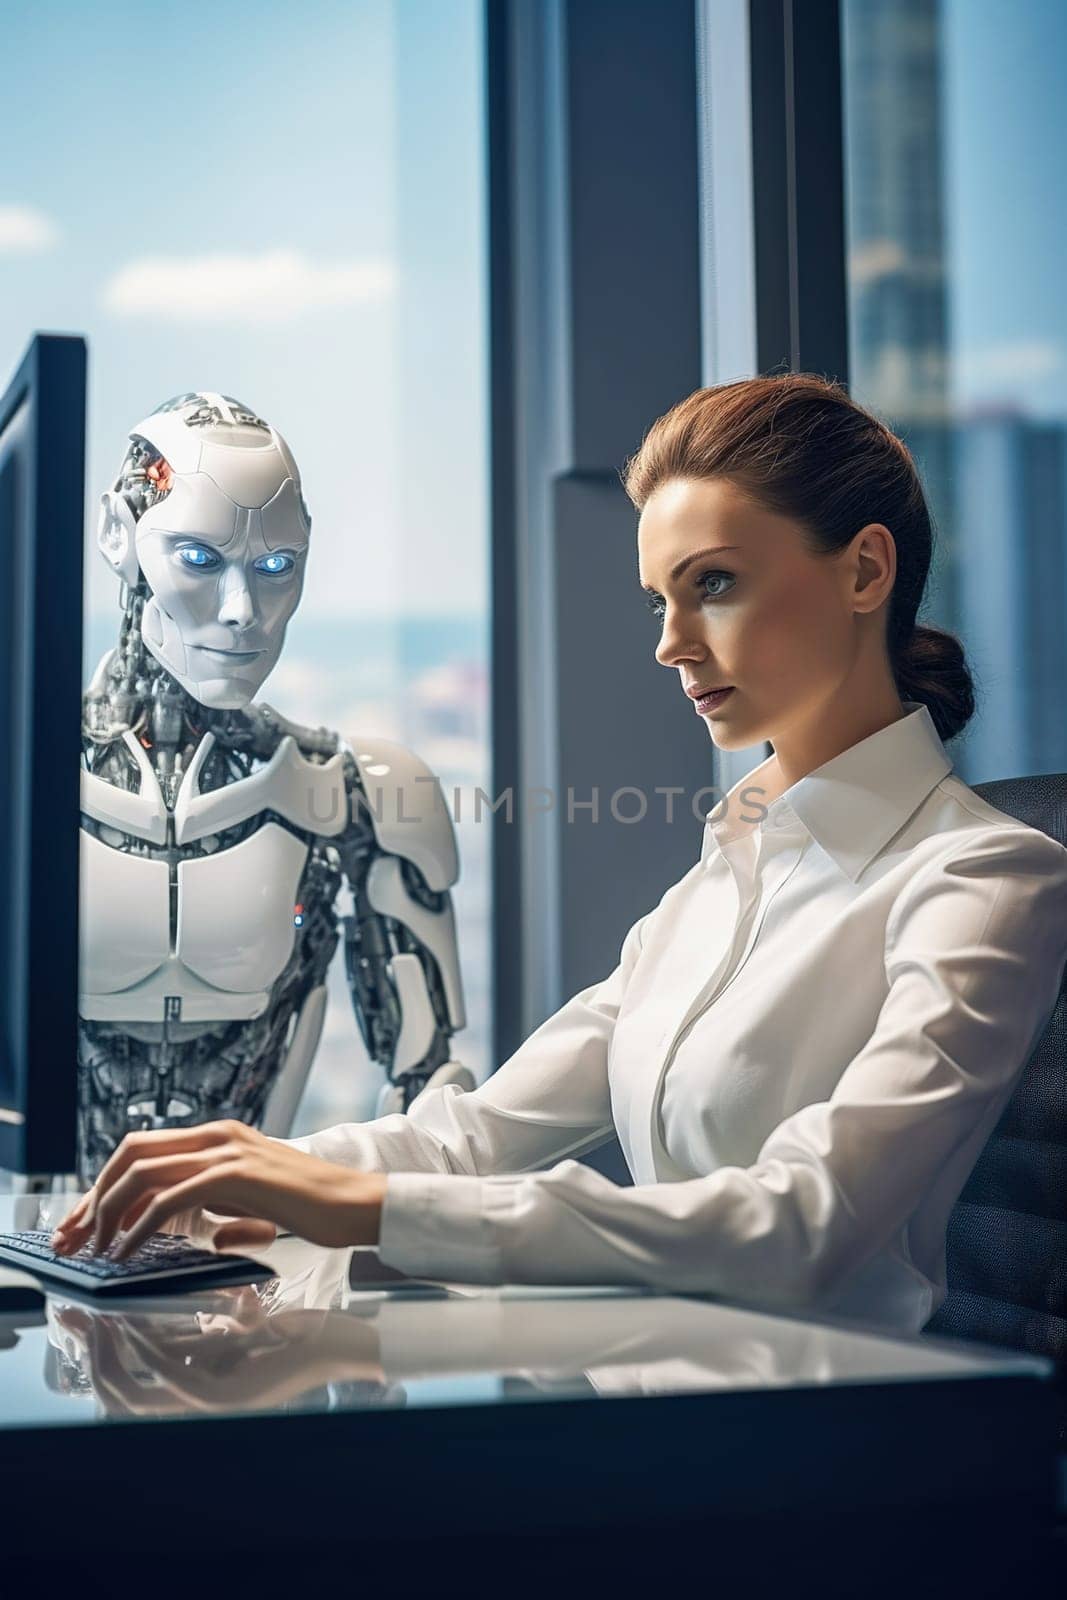 Interview with a futuristic robot in a modern office. The concept of the technical breakthrough of artificial intelligence. by Yurich32